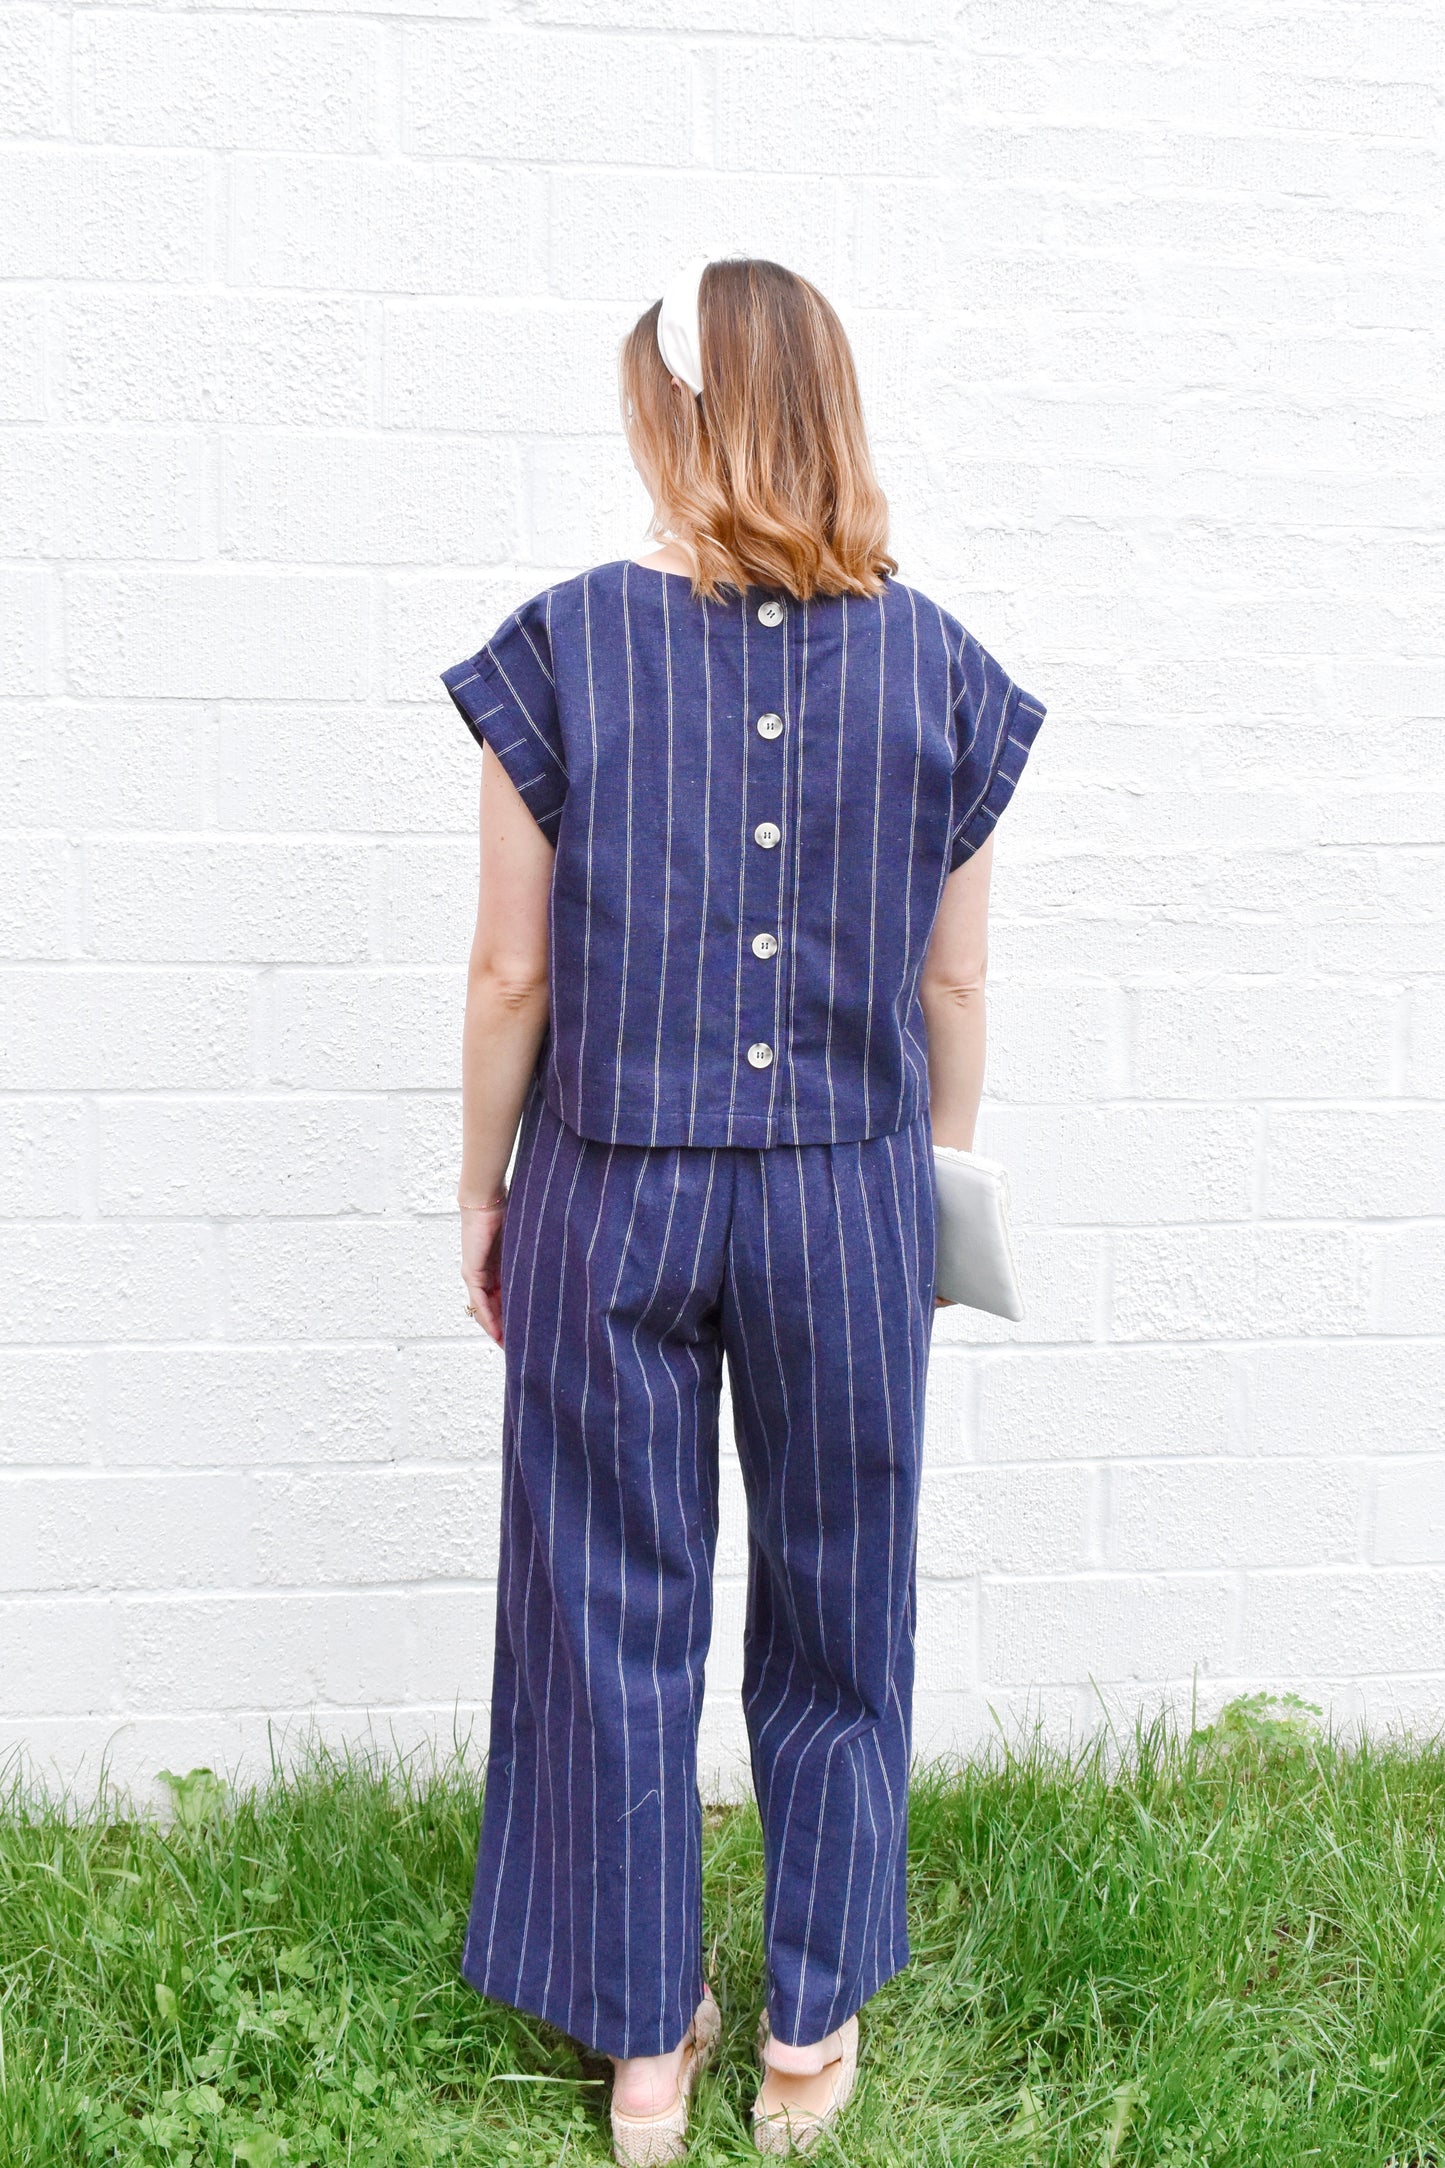 So Chic Navy Striped Pants